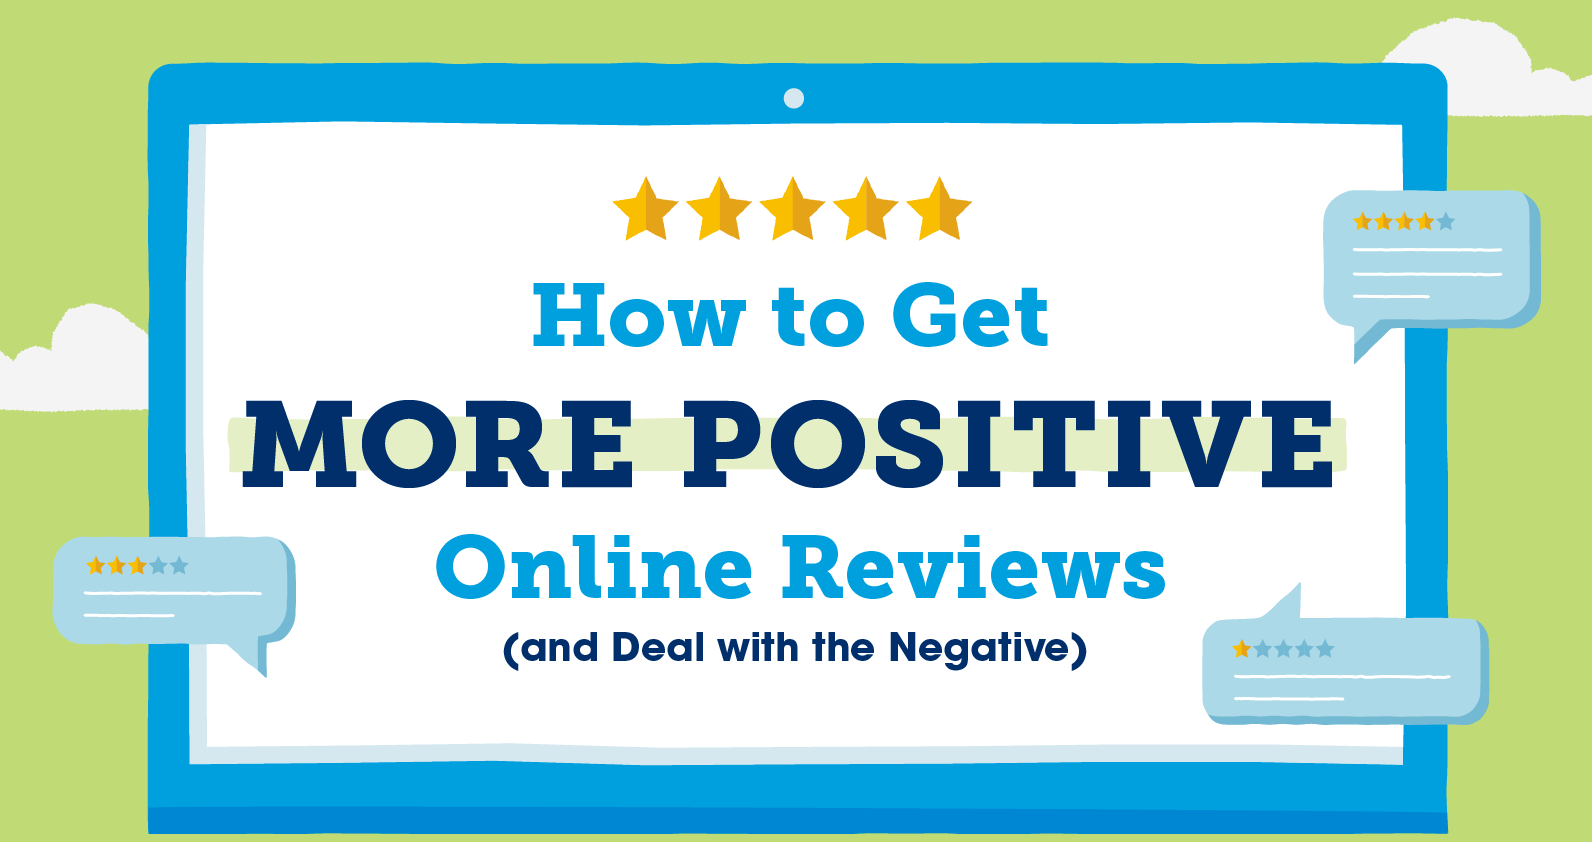 How to Get More Positive Online Reviews